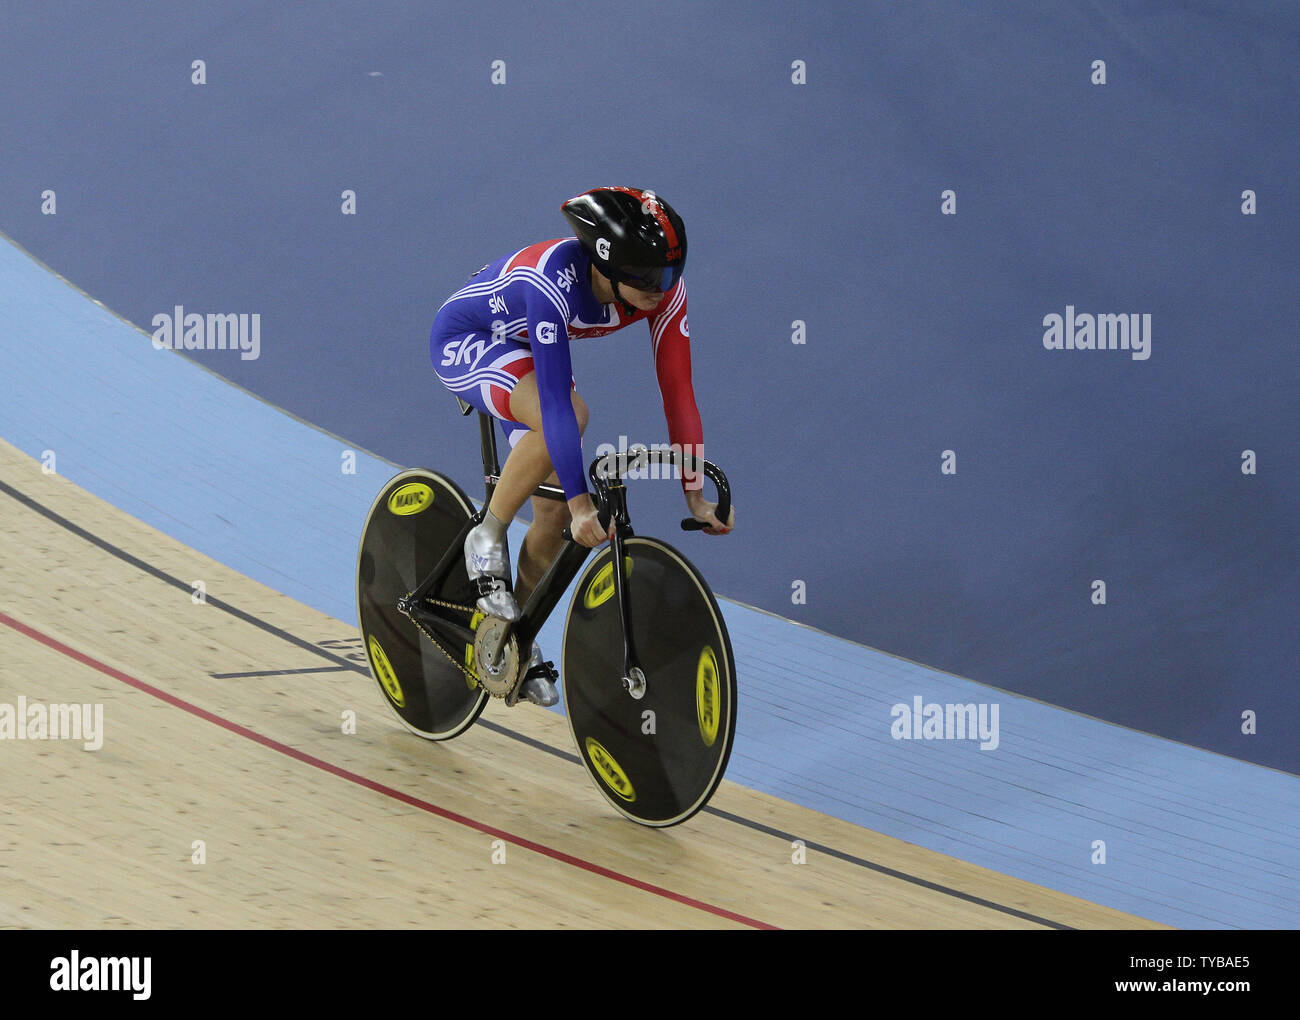 Great Britain's Victoria Pendleton takes part in the Women's Sprint at the UCI Track Cycling World Cup at the new Olympic Velodrome in Stratford, London on February 17, 2012.        UPI/Hugo Philpott Stock Photo